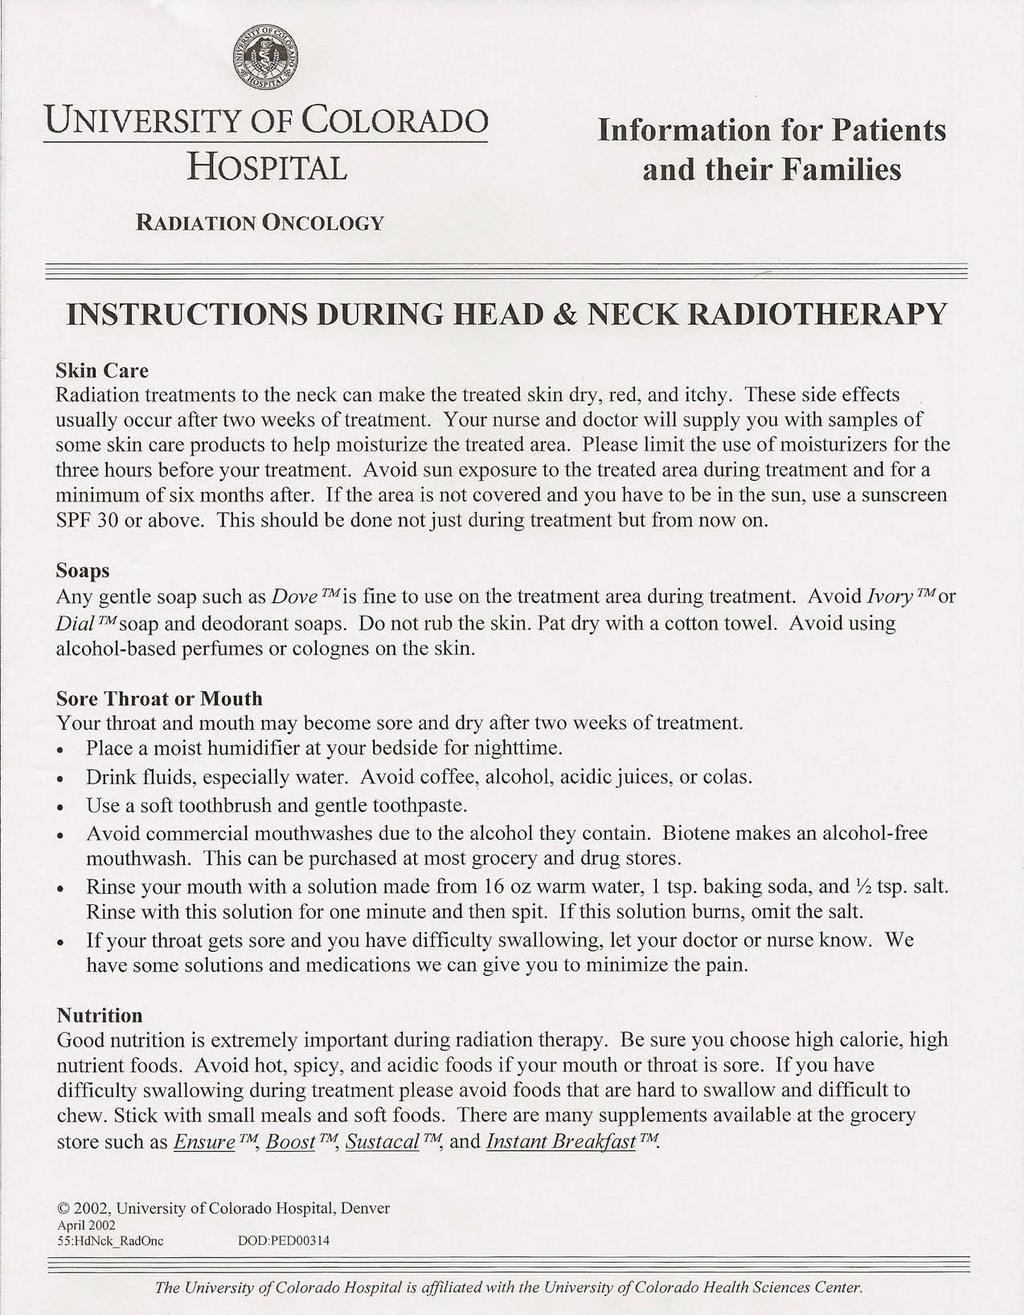 UNIVERSITY OF COLORADO HOSPITAL Information for Patients and their Families RADIATION ONCOLOGY INSTRUCTIONS DURING HEAD & NECK RADIOTHERAPY Skin Care Radiation treatments to the neck can make the